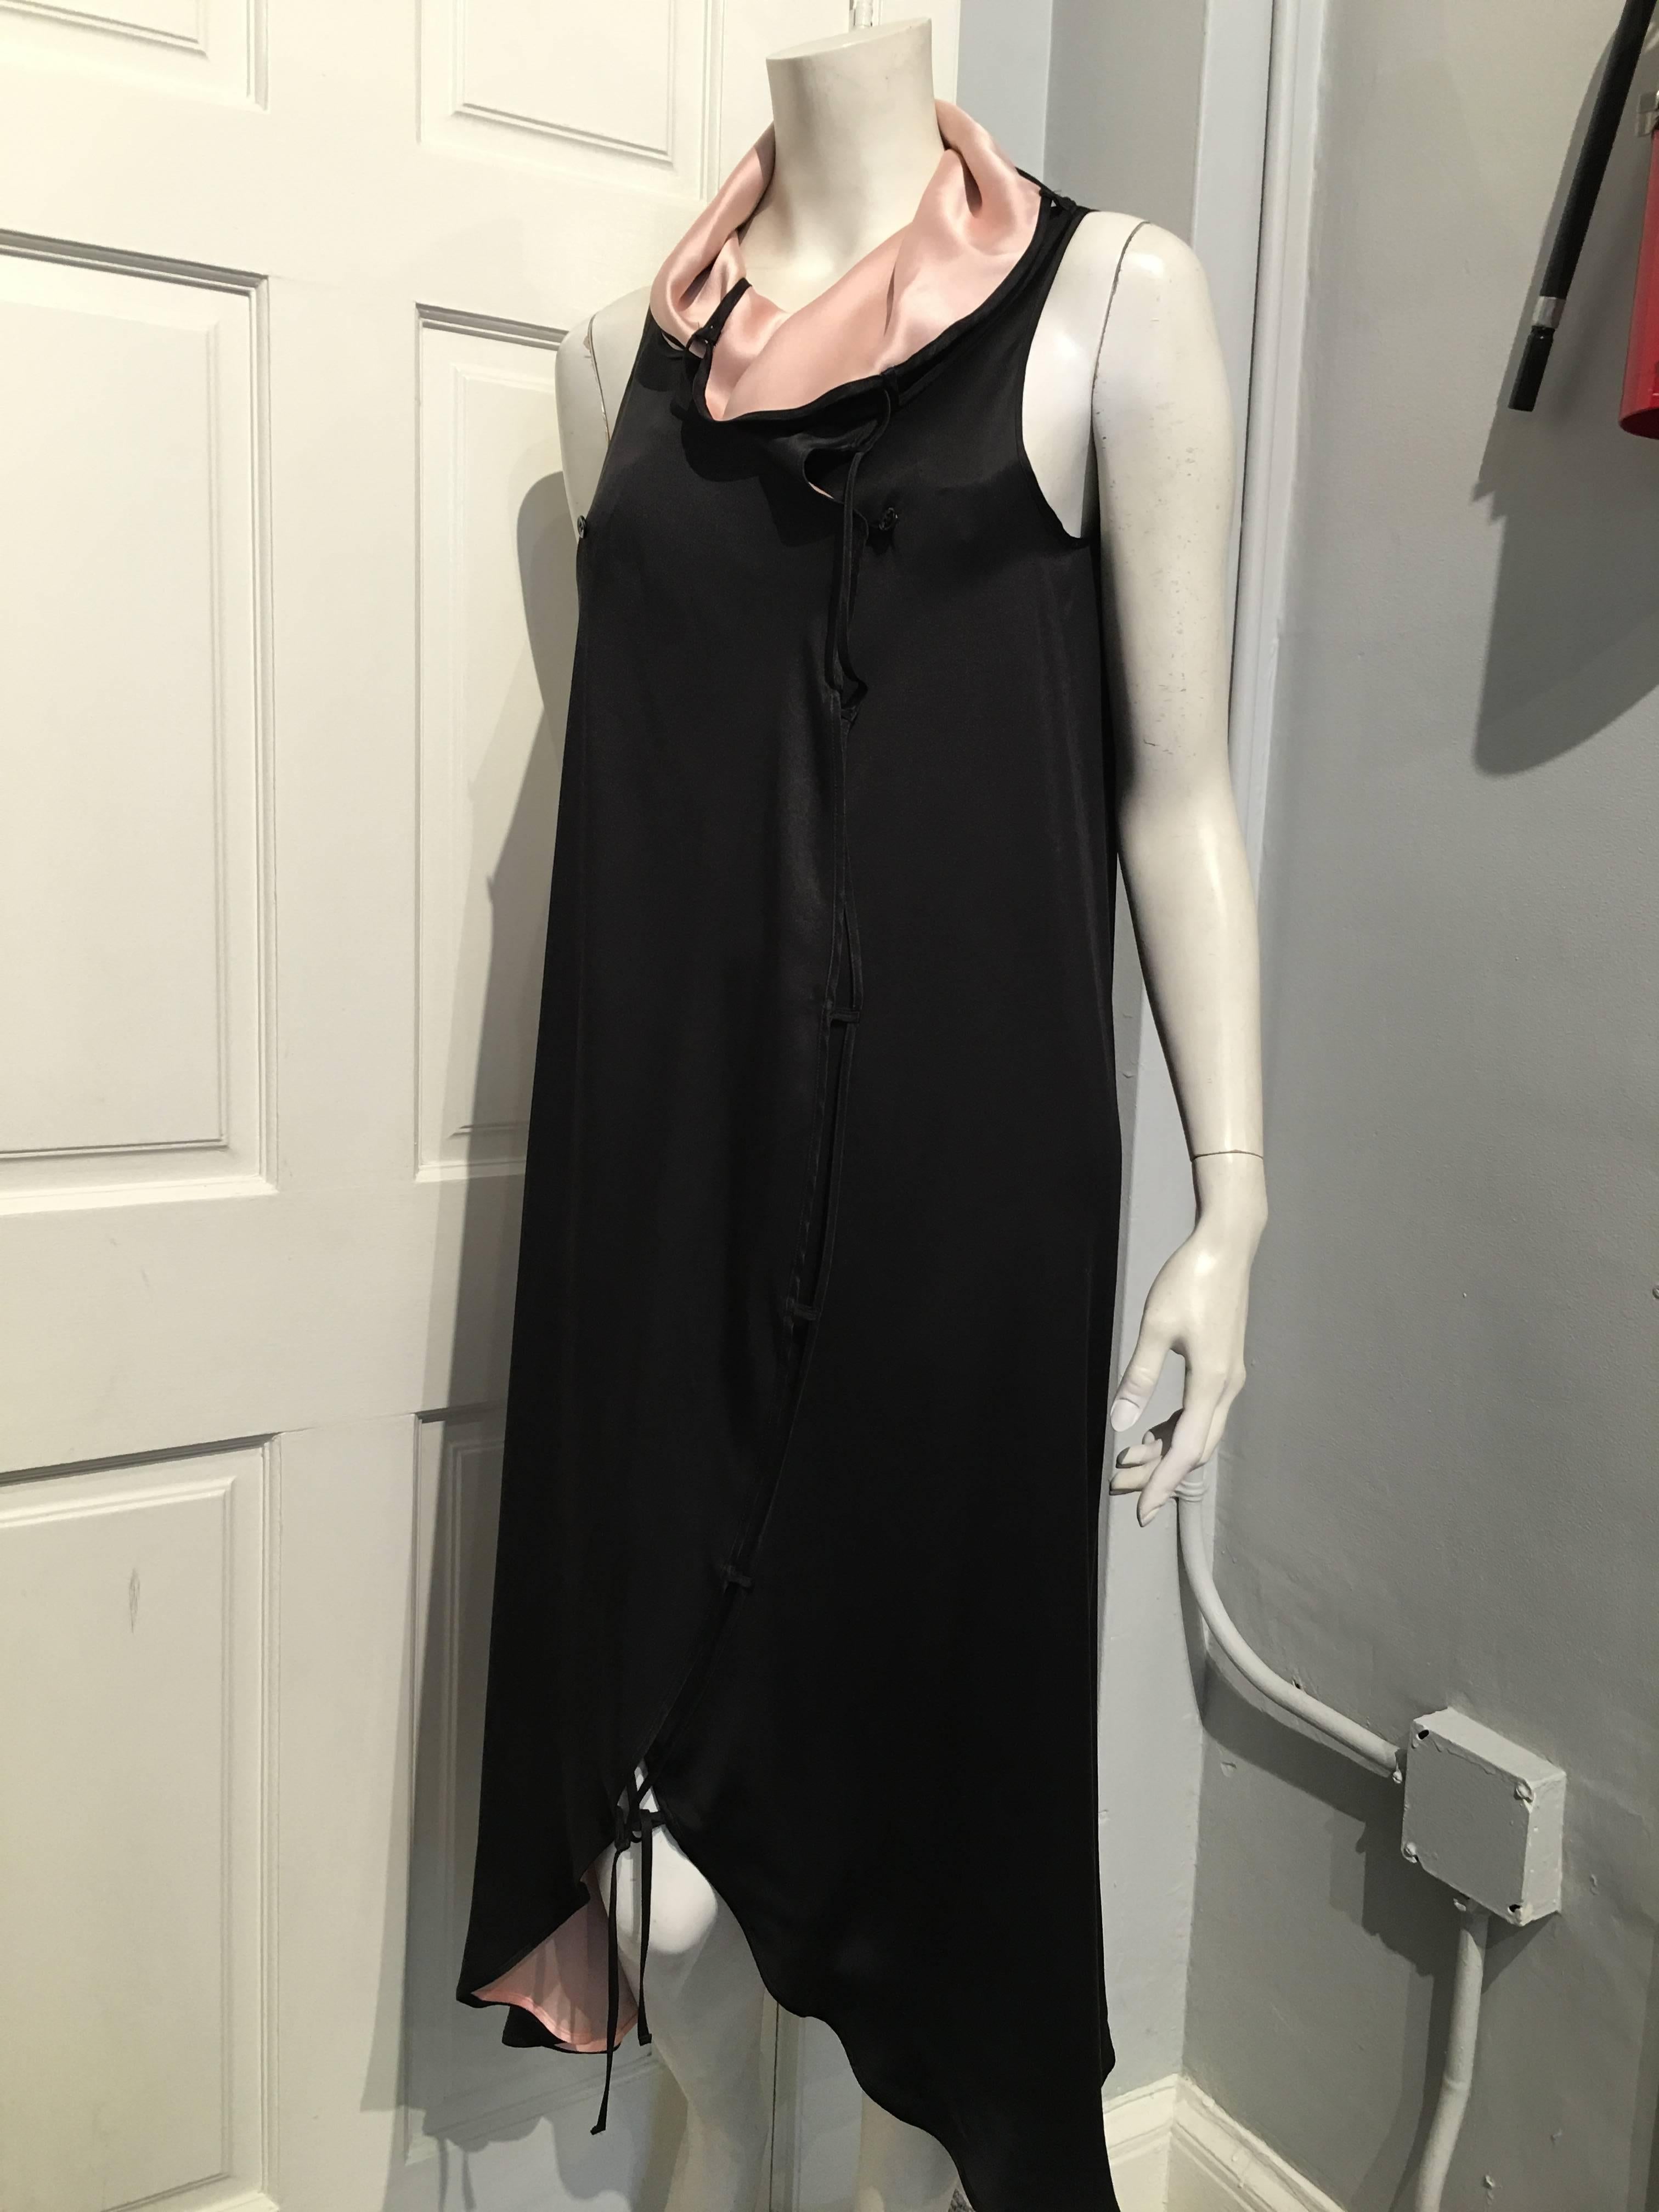 Issey Miyake long, sleeveless black silk satin dress with pale pink lining and drape neck collar. It has a lattice type accent down the front with a 1/4